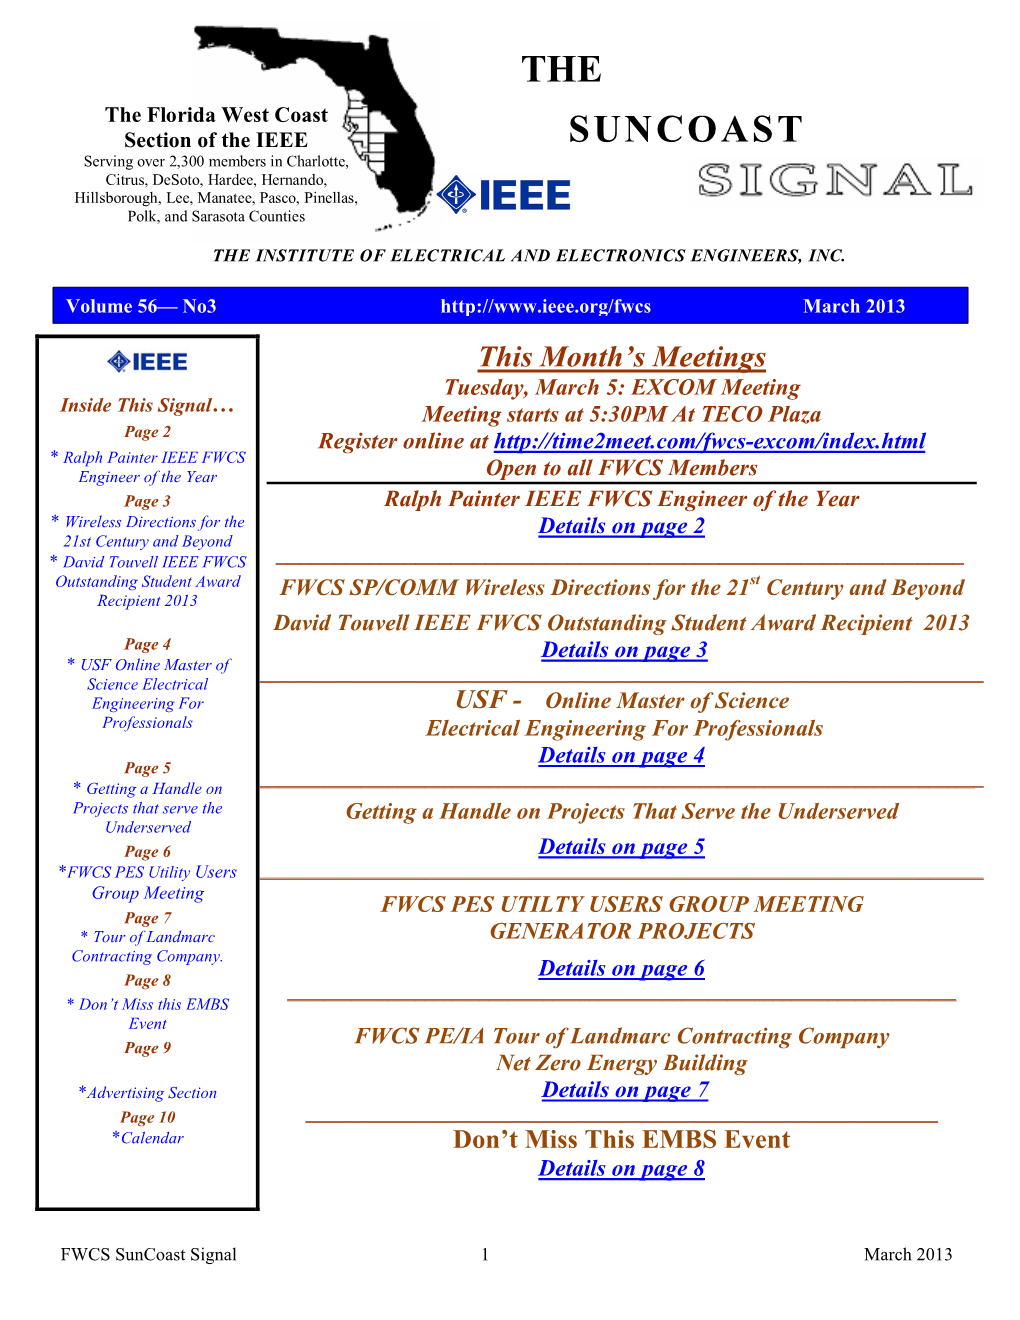 THE SUNCOAST SIGNAL Is Published Monthly by the Florida West Coast Section (FWCS) of the Institute of Electrical and Electronics Engineers, Inc